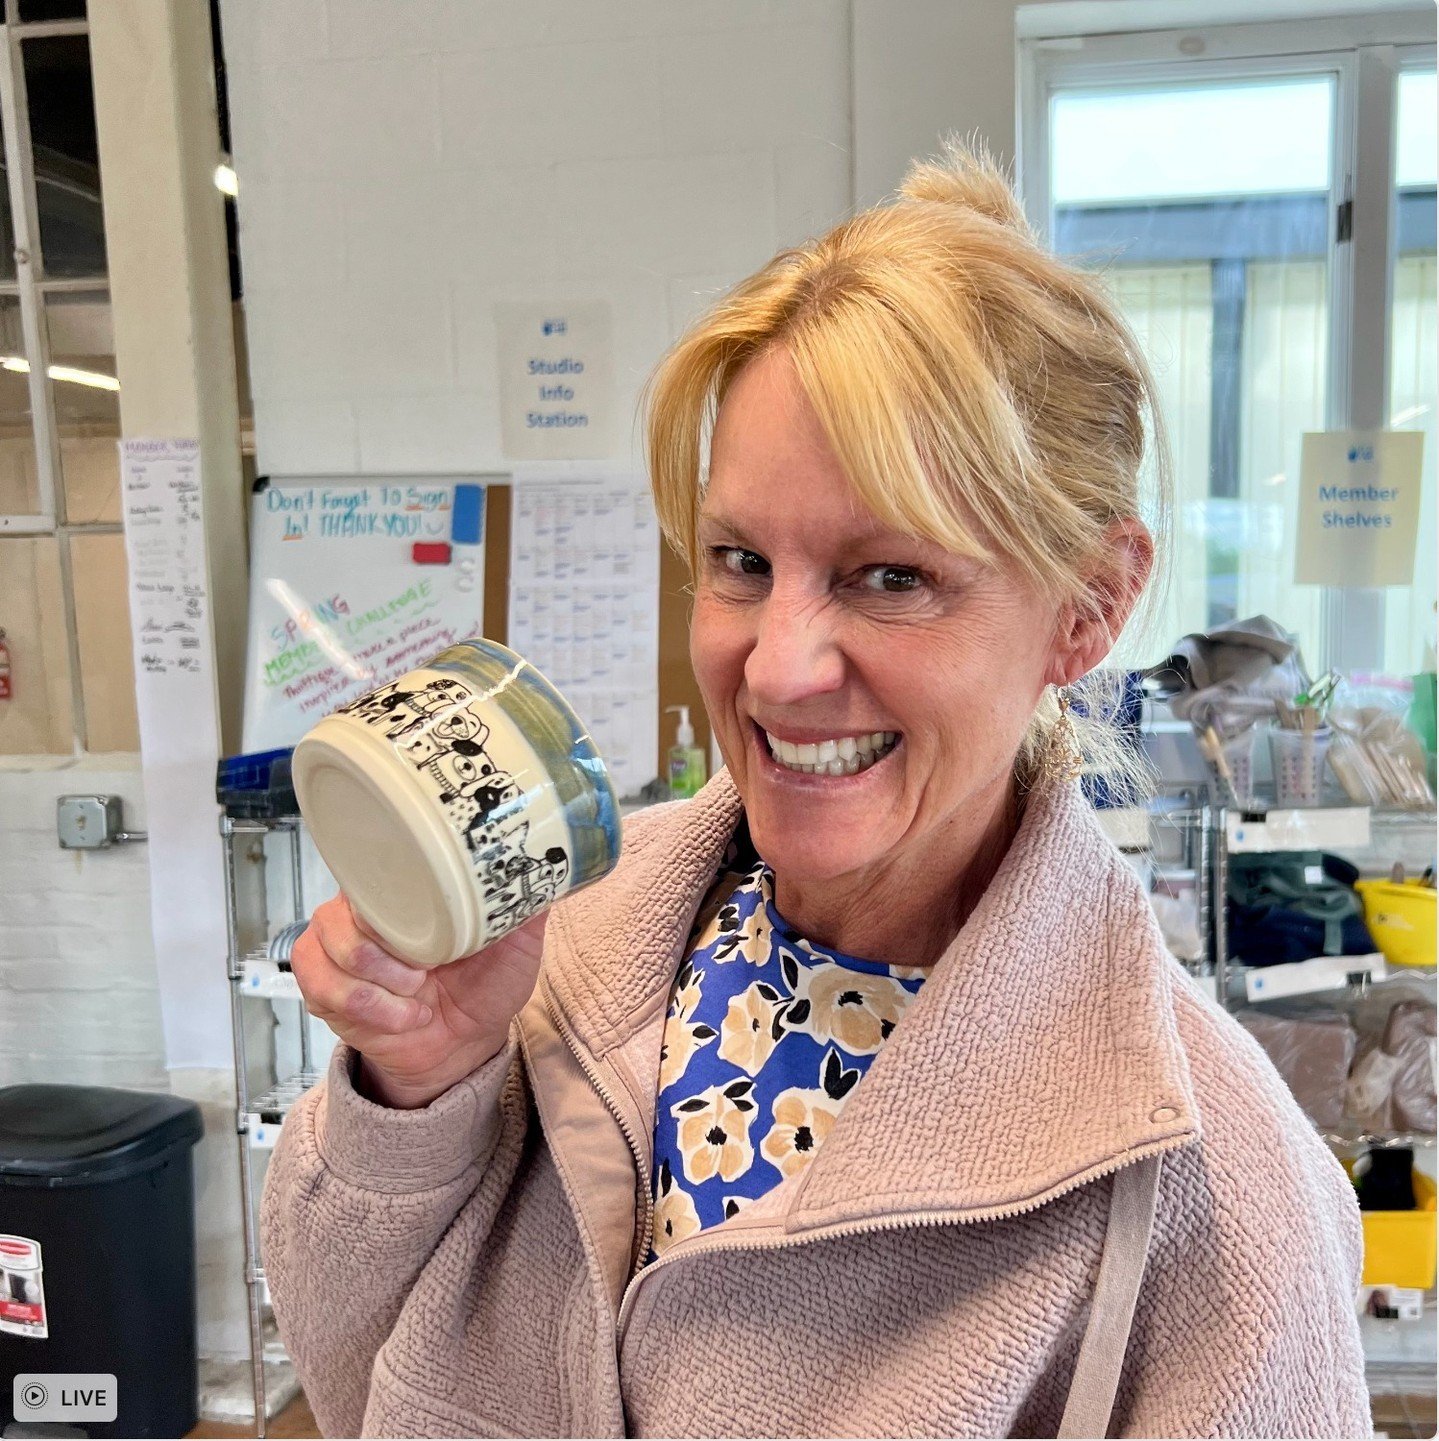 Our Member Jean @jamenden_hall with her sweet puppy cup, fresh out of the kiln. Can you guess how she did this?⁠
⁠
#puppycup #doggoneadorable #handmadeceramics #coffeepuppy #doglovergift #functionalart #dogart #happymug #ceramiclove #harrisonburgart 